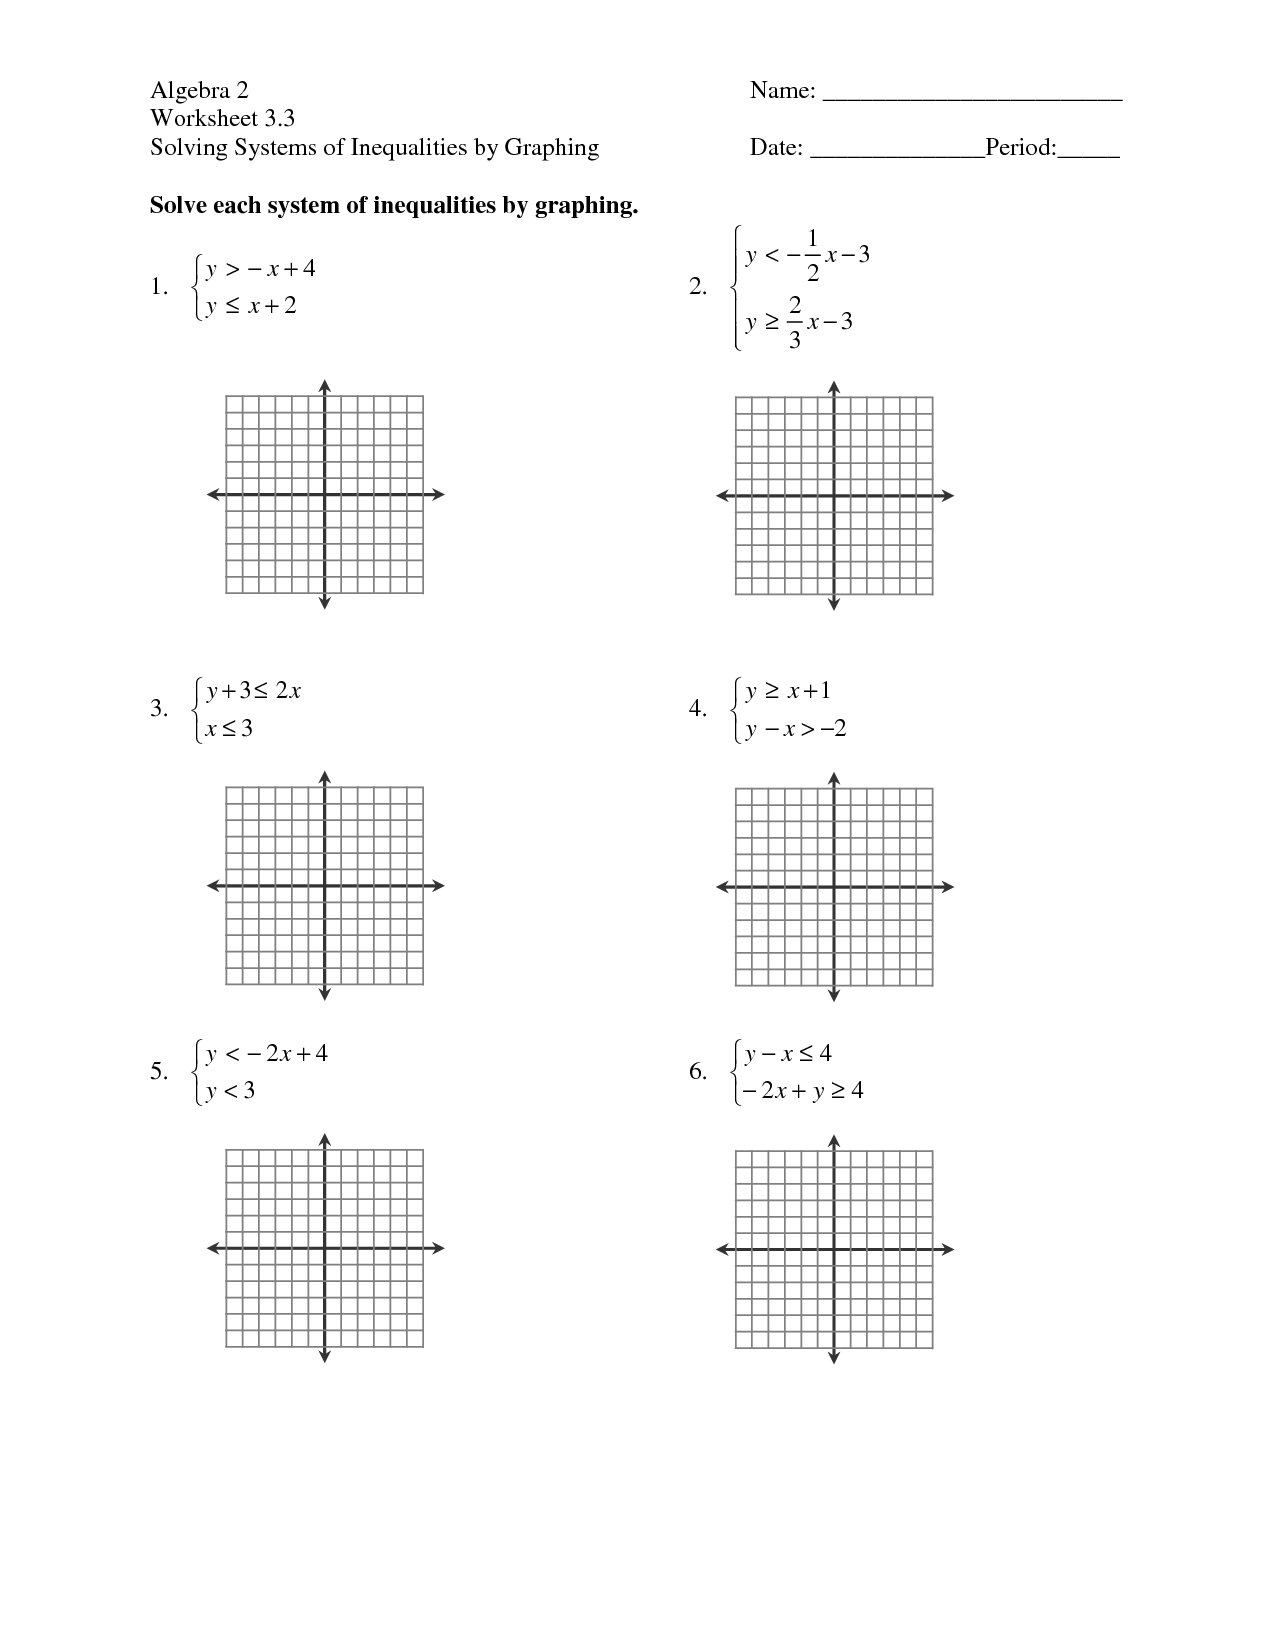 Solving Systems of Inequalities by Graphing Worksheets